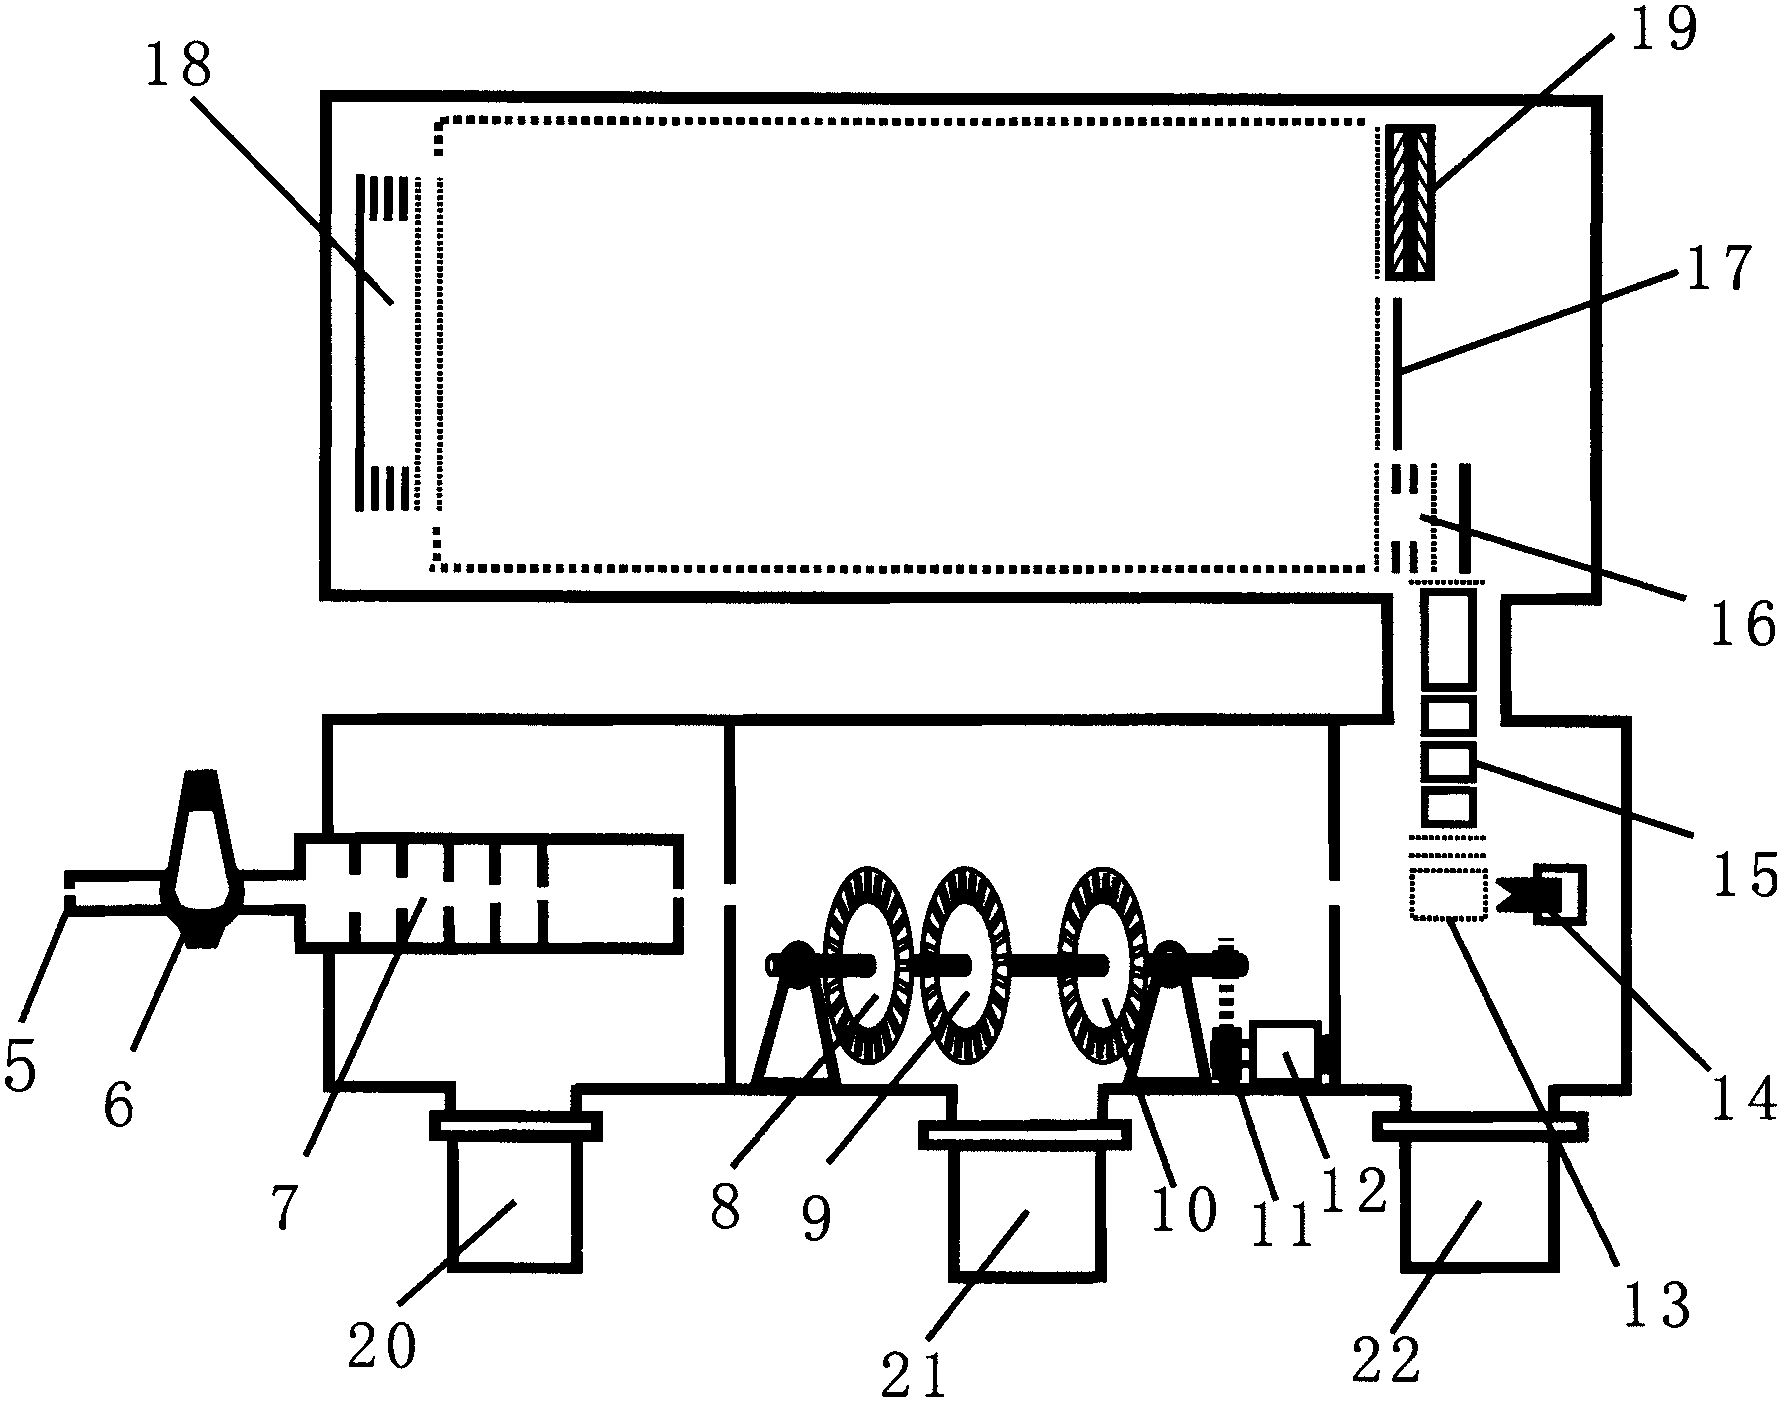 Aerosol mass spectrometer with particle size selection